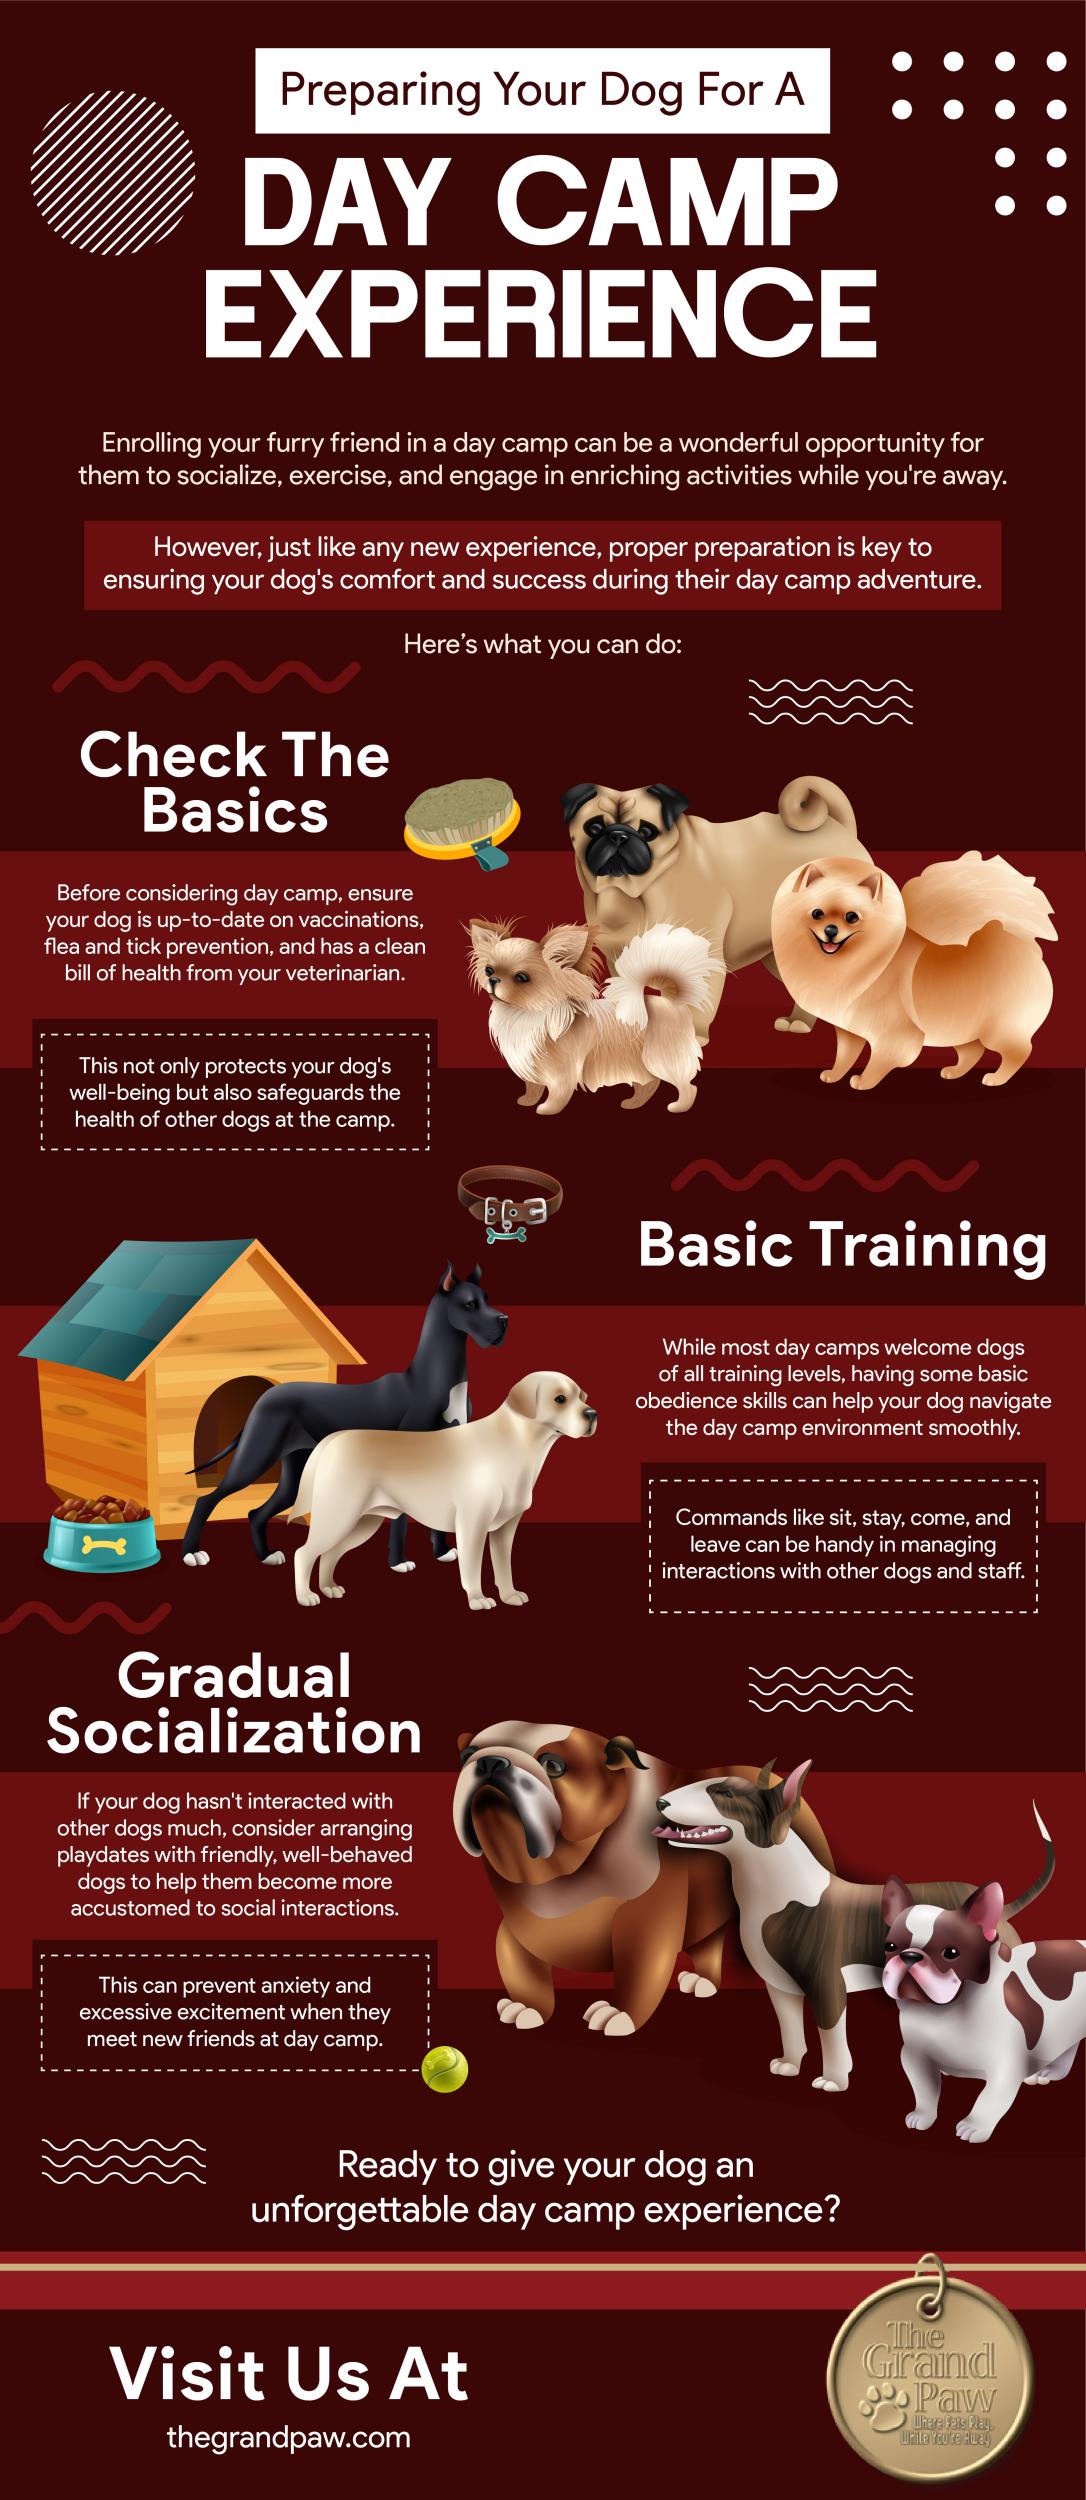 Preparing Your Dog For A Day Camp Experience